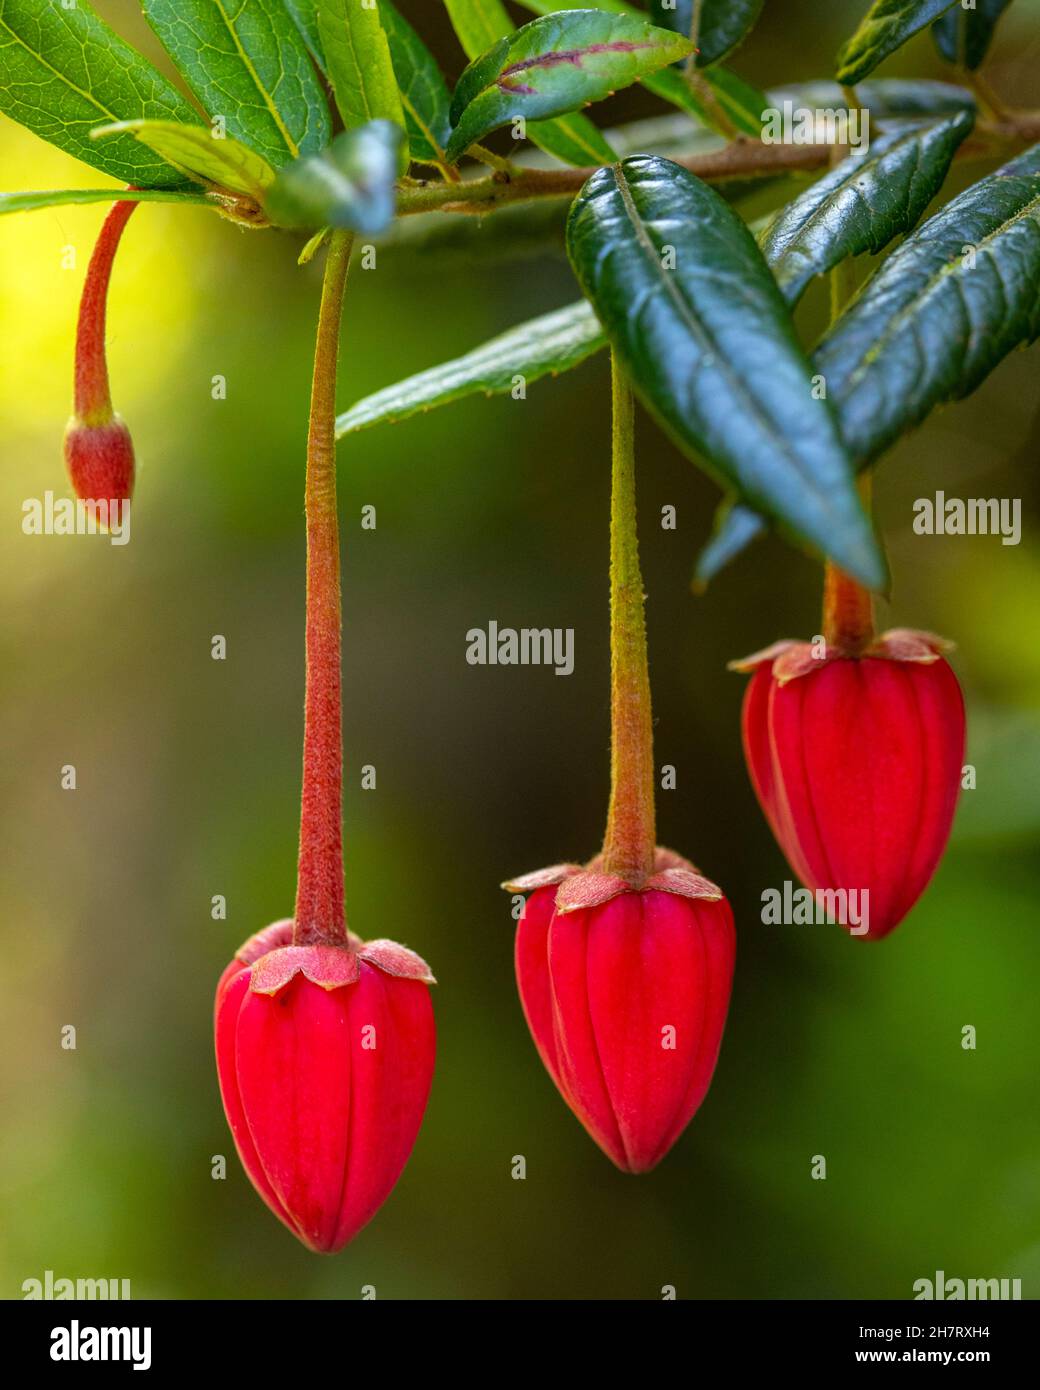 Close-up of the buds on a Chilean Lantern Tree, formerly known as Crinodendron hookerianum. Stock Photo